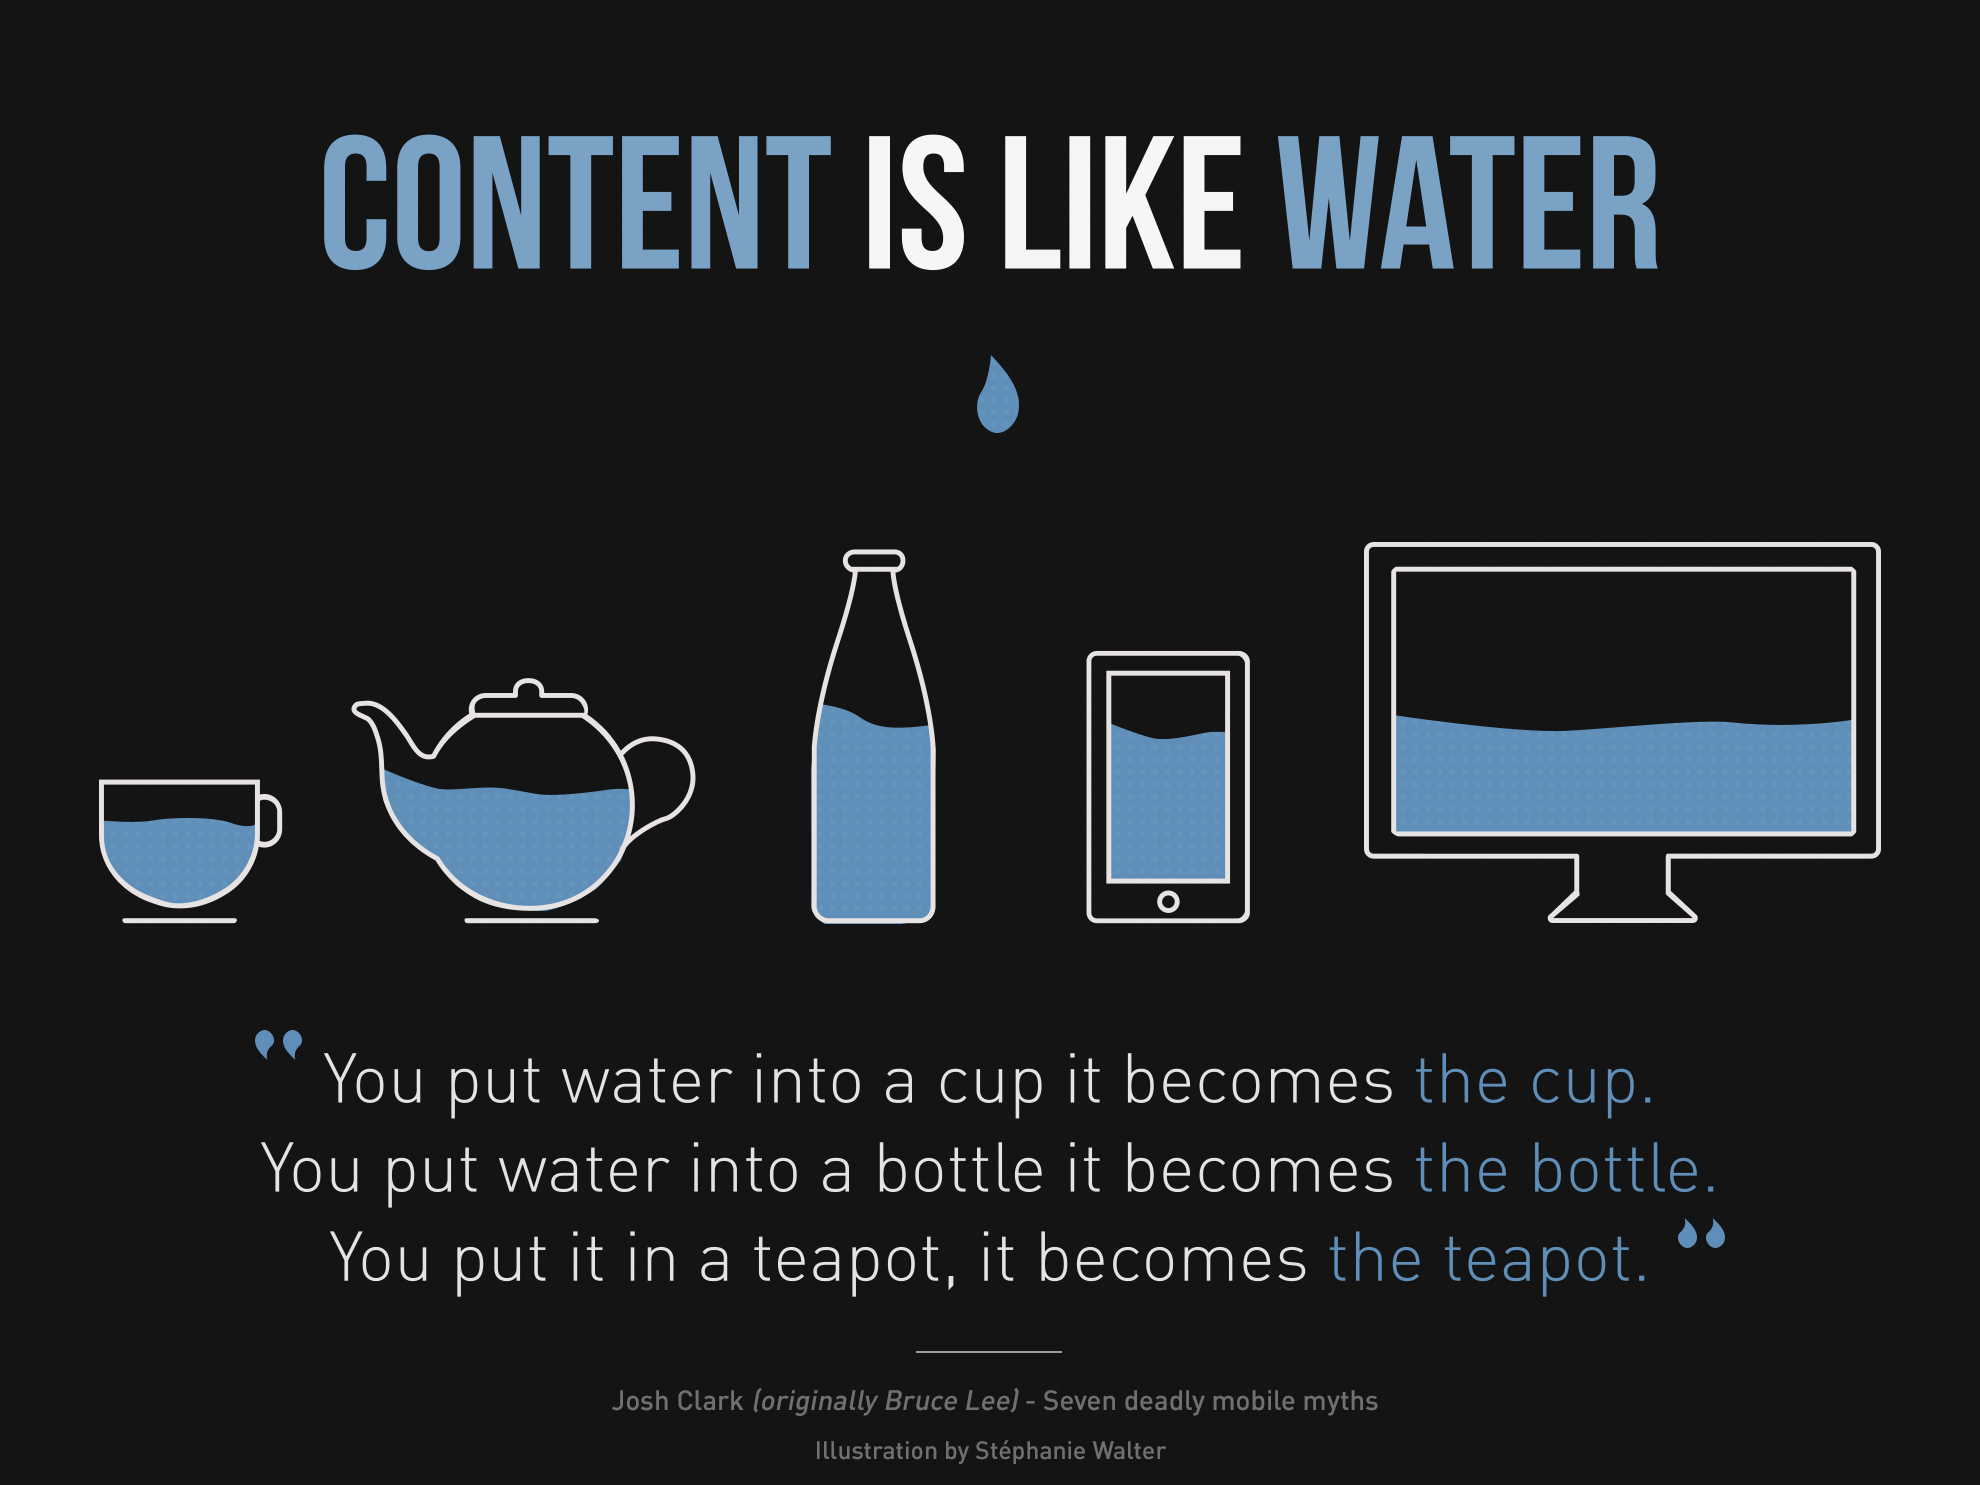 Content is like water. You put water into a cup it becomes the cup. You put water into a bottle it becomes the bottle. You put it in a teapot, it becomes the teapot.